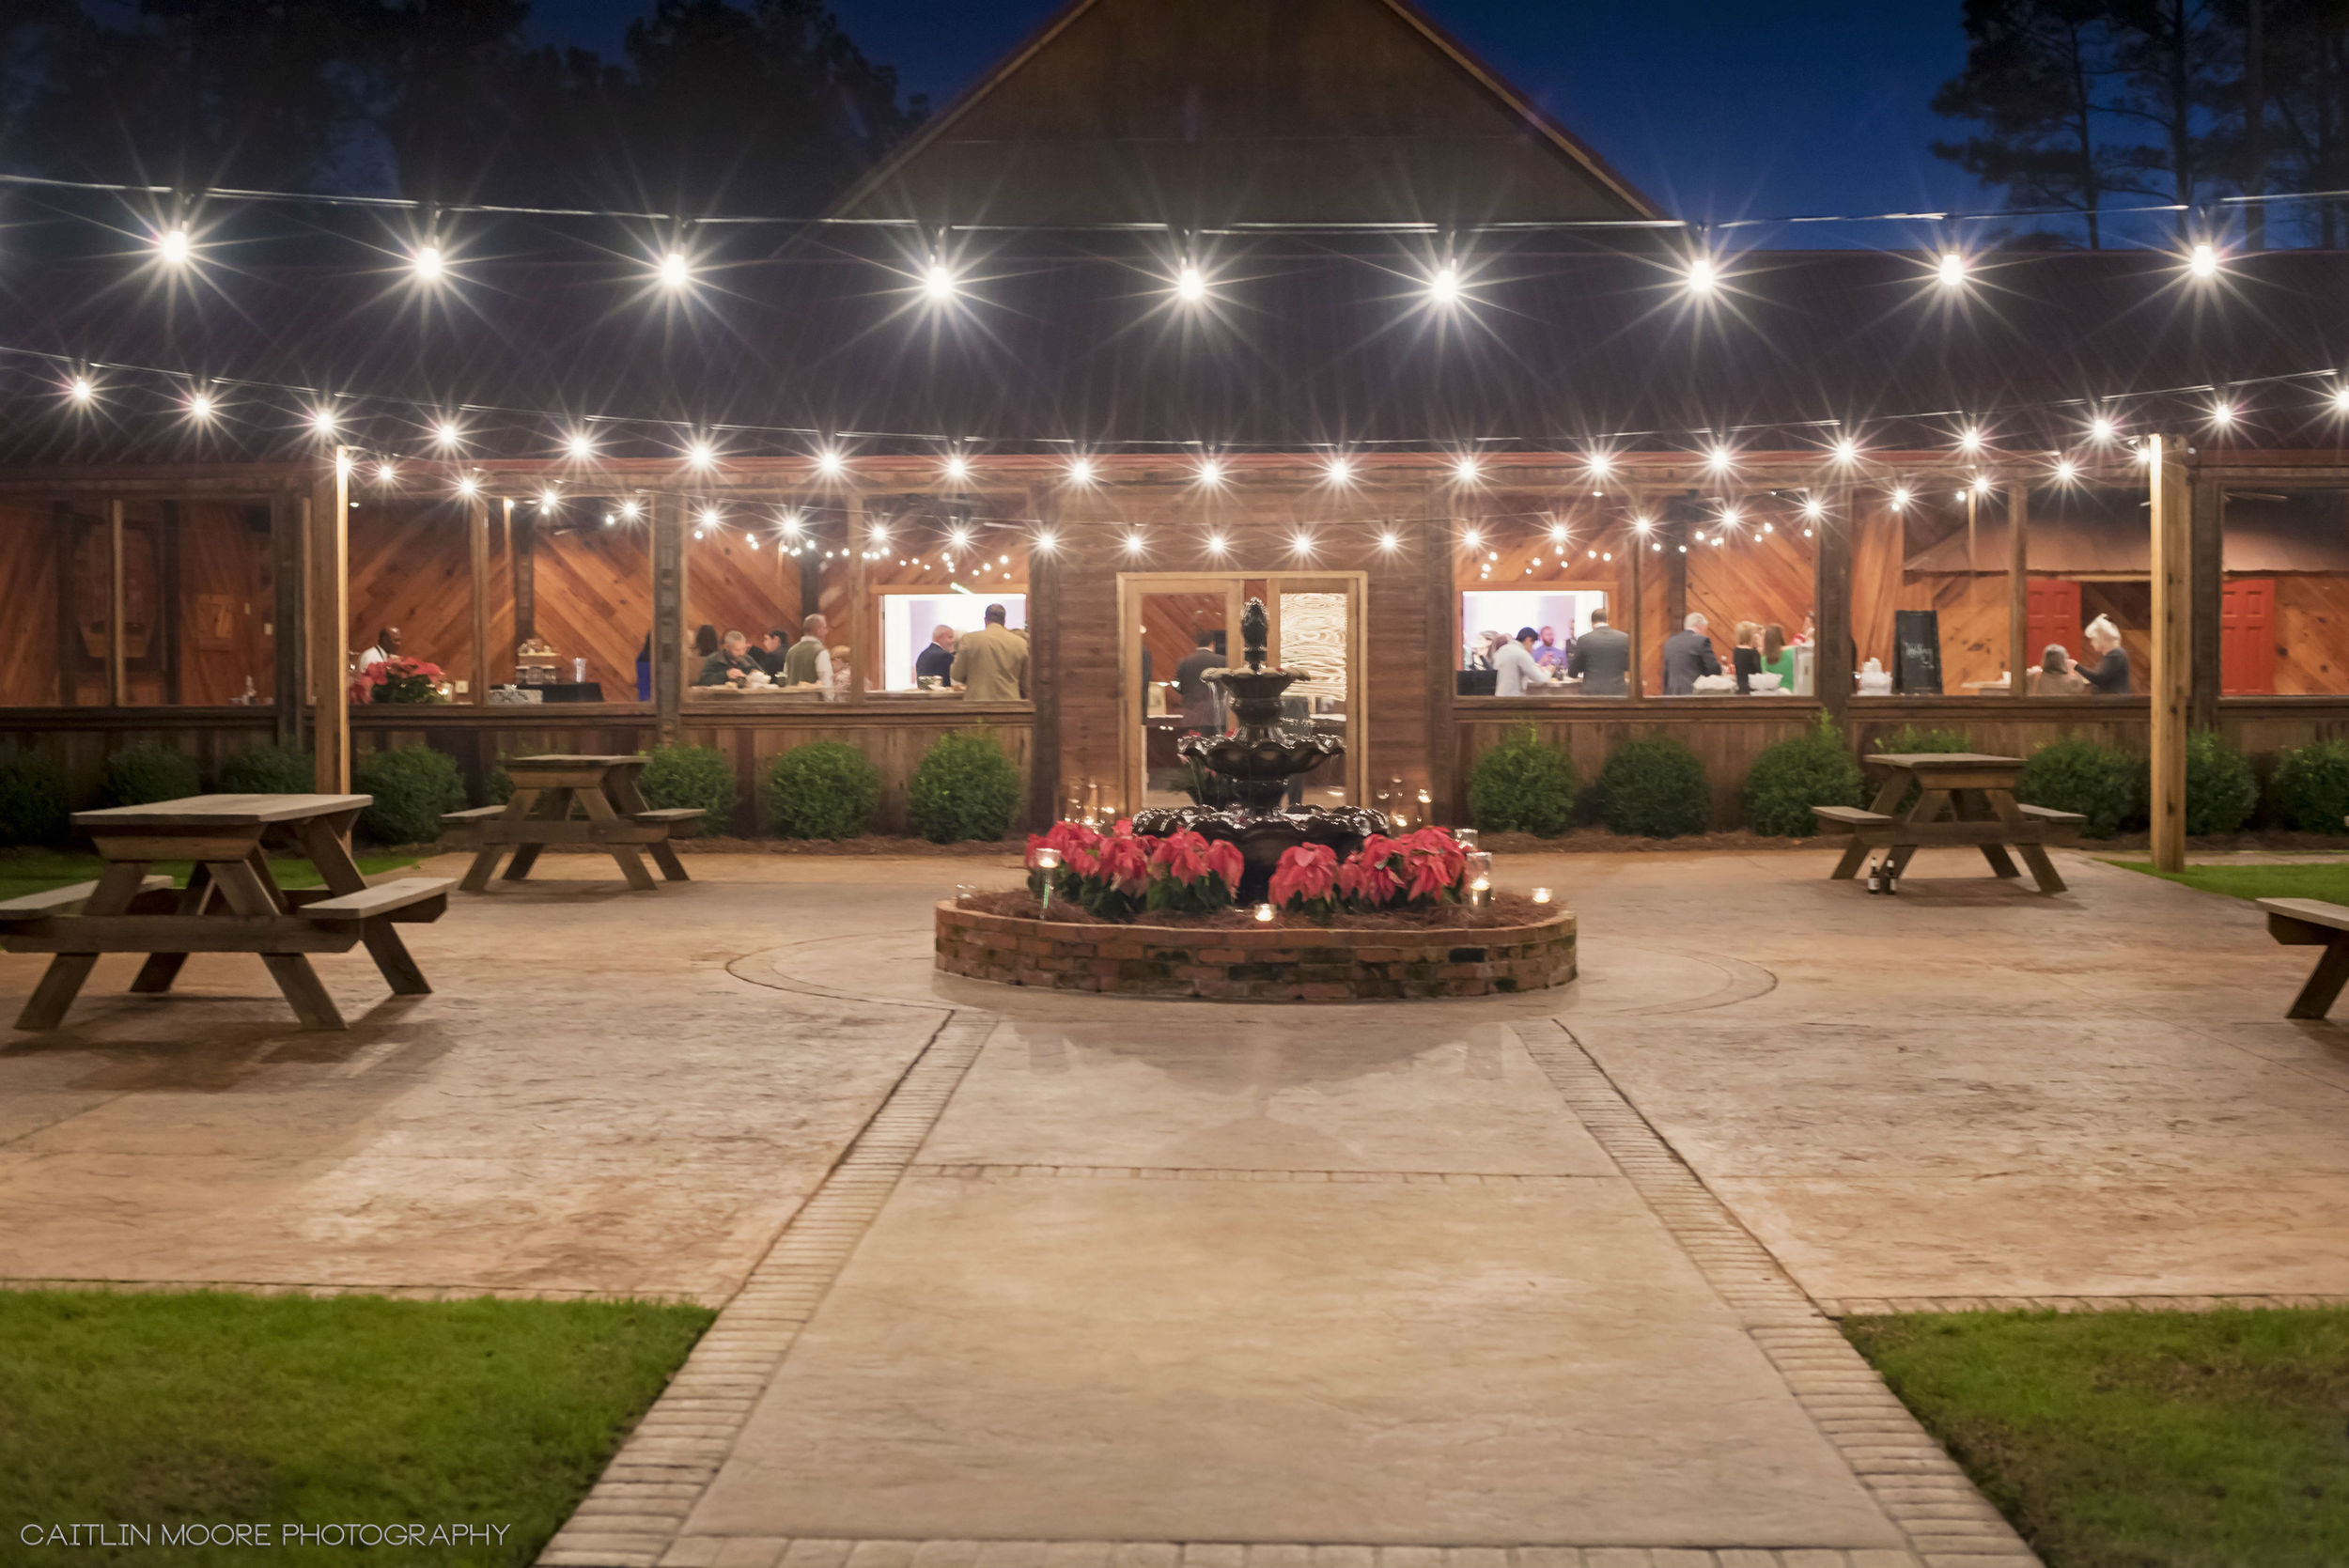 The Courtyard at Hidden Acres w/ New Bistro Lighting | Caitlin Moore Photography